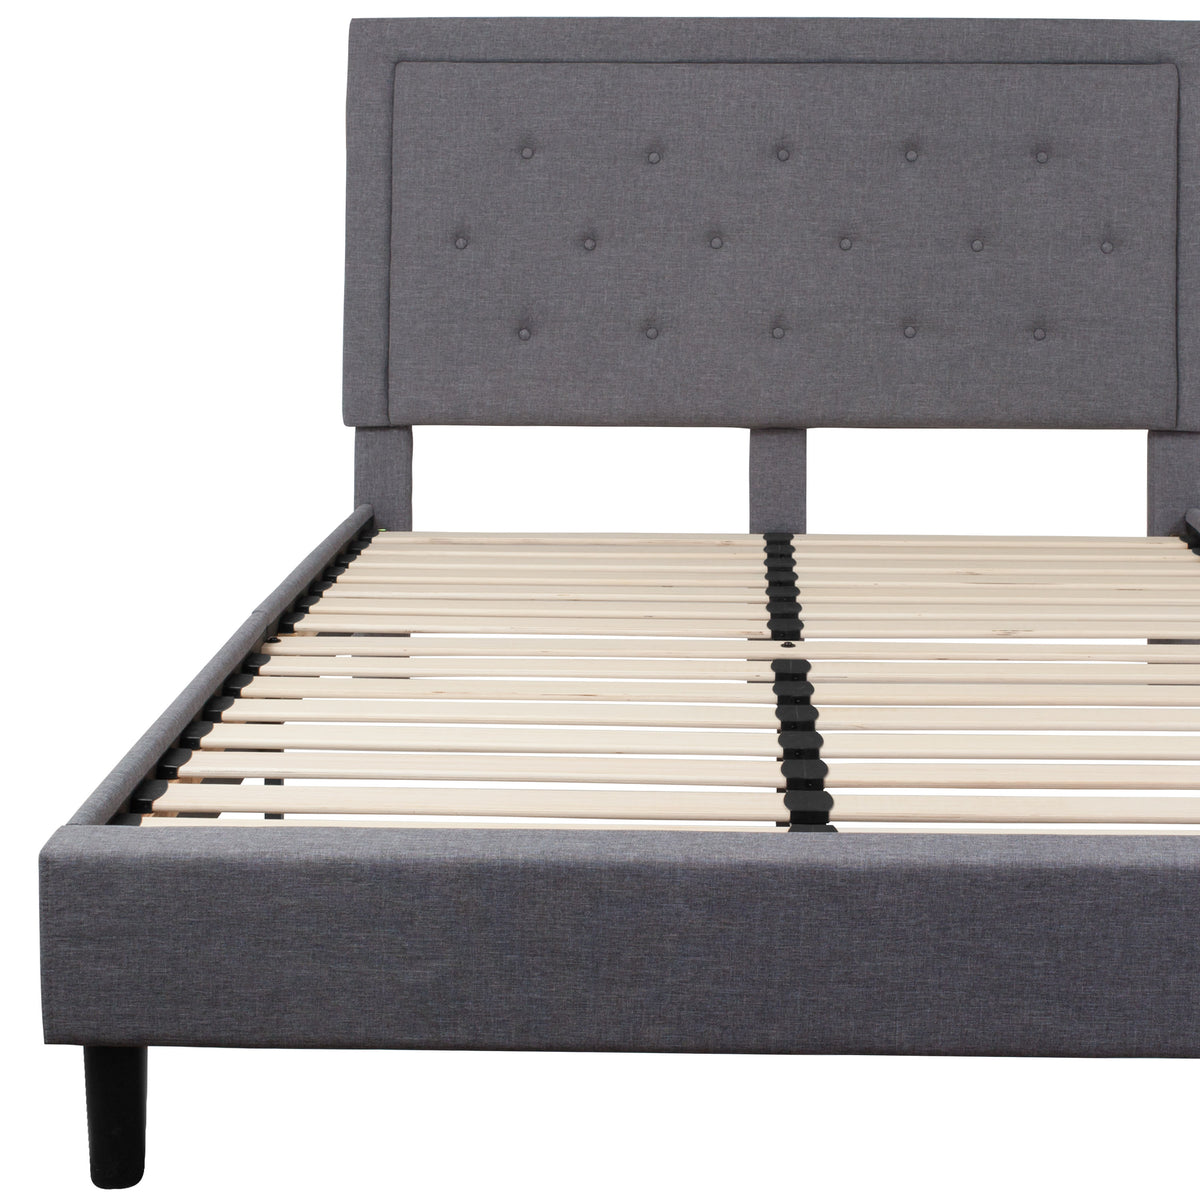 Light Gray,Queen |#| Queen Size Panel Tufted Upholstered Platform Bed in Light Gray Fabric